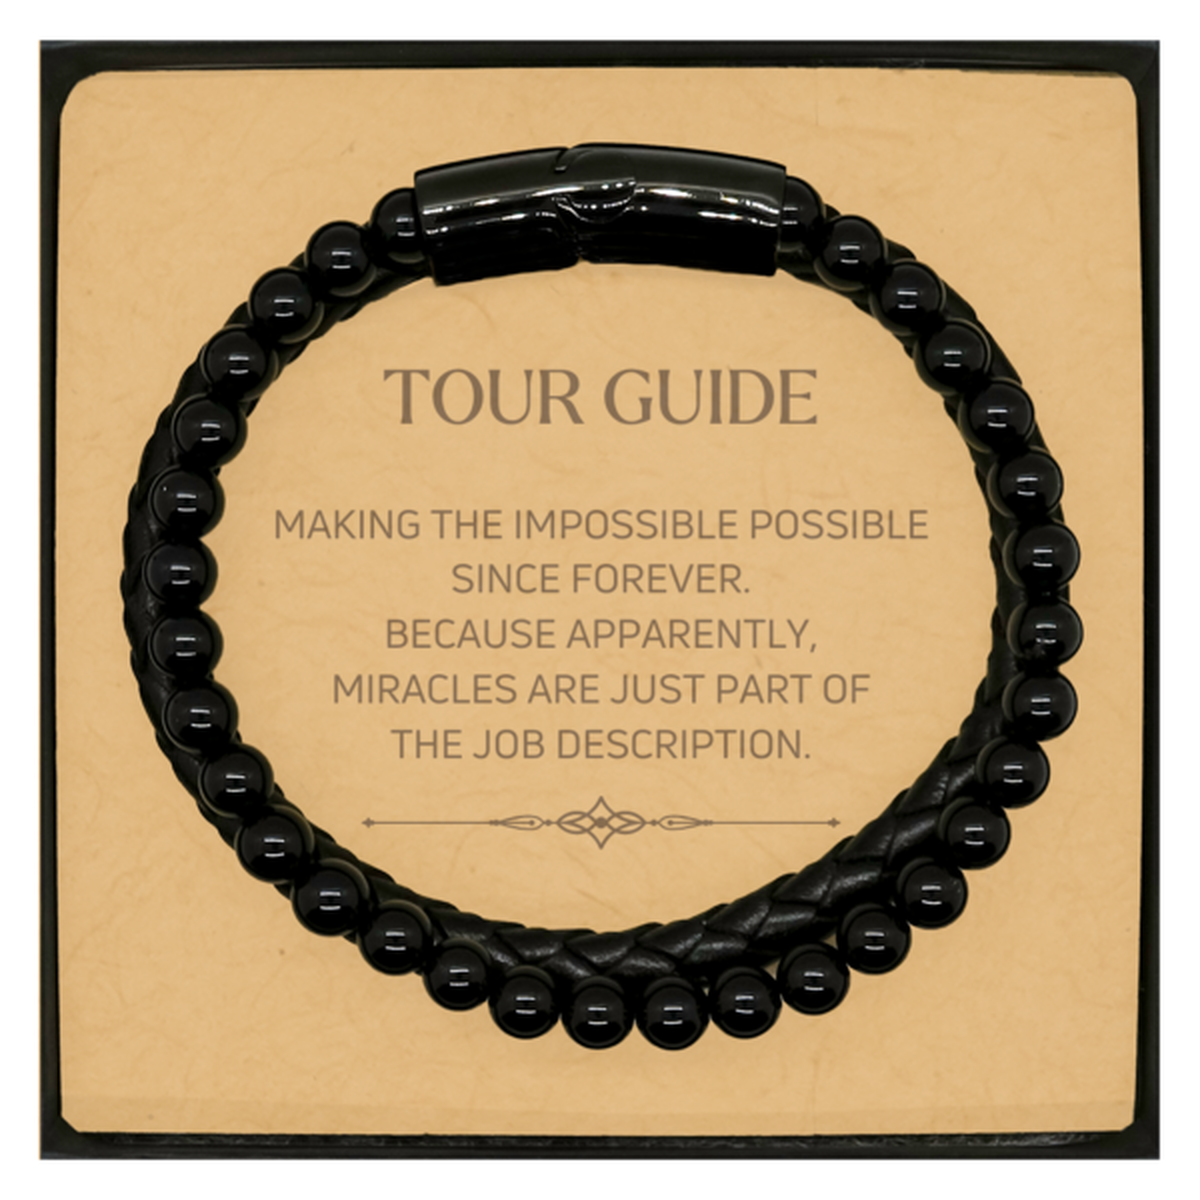 Funny Tour Guide Gifts, Miracles are just part of the job description, Inspirational Birthday Christmas Stone Leather Bracelets For Tour Guide, Men, Women, Coworkers, Friends, Boss